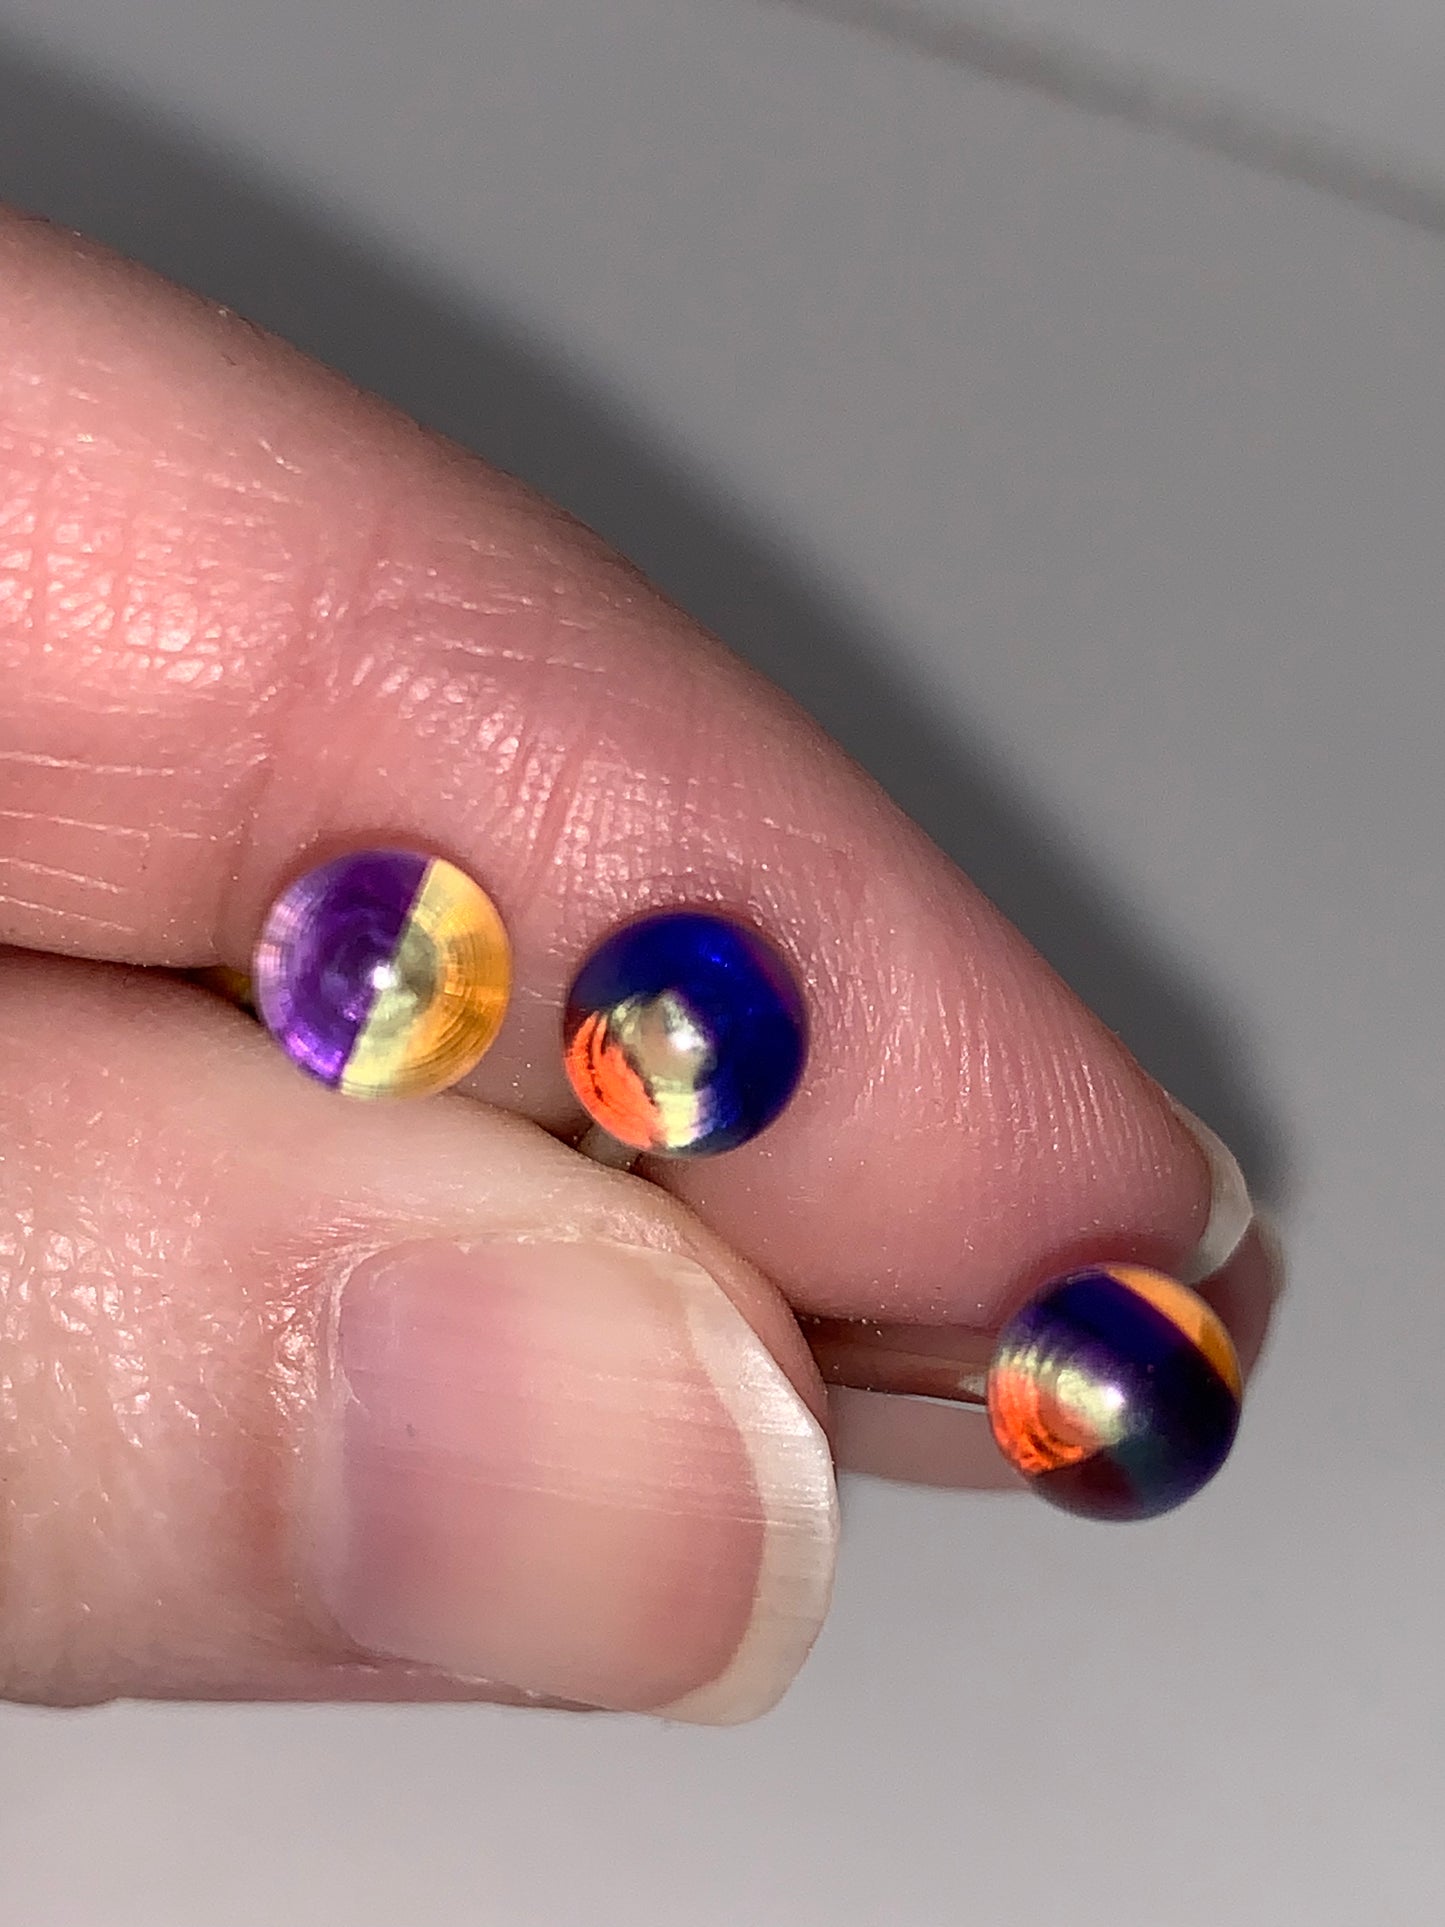 14 Gauge Purple, Clear and Orange Striped Tongue Ring